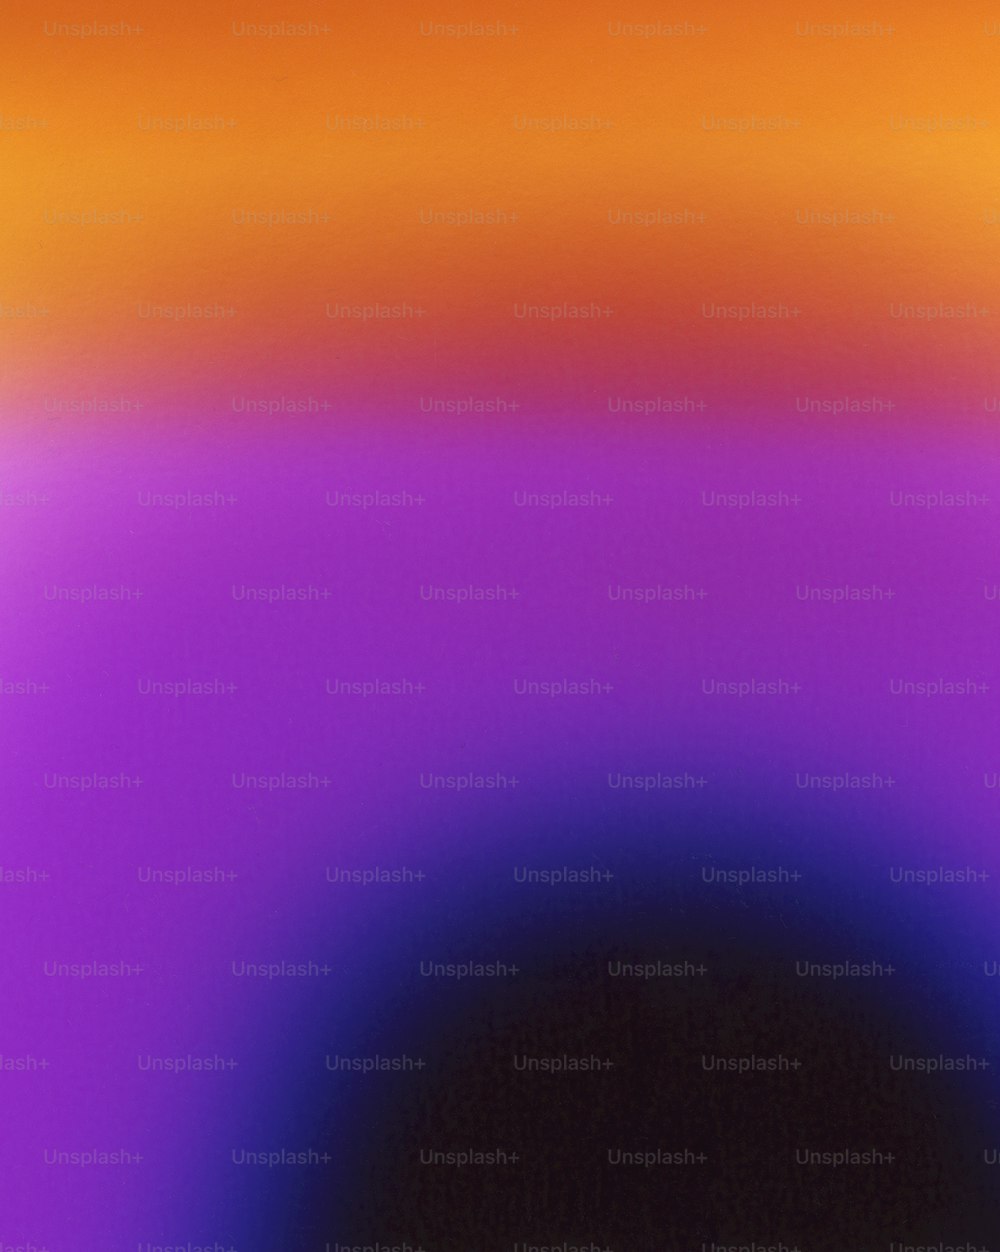 a blurry image of a black hole in the middle of a purple and orange